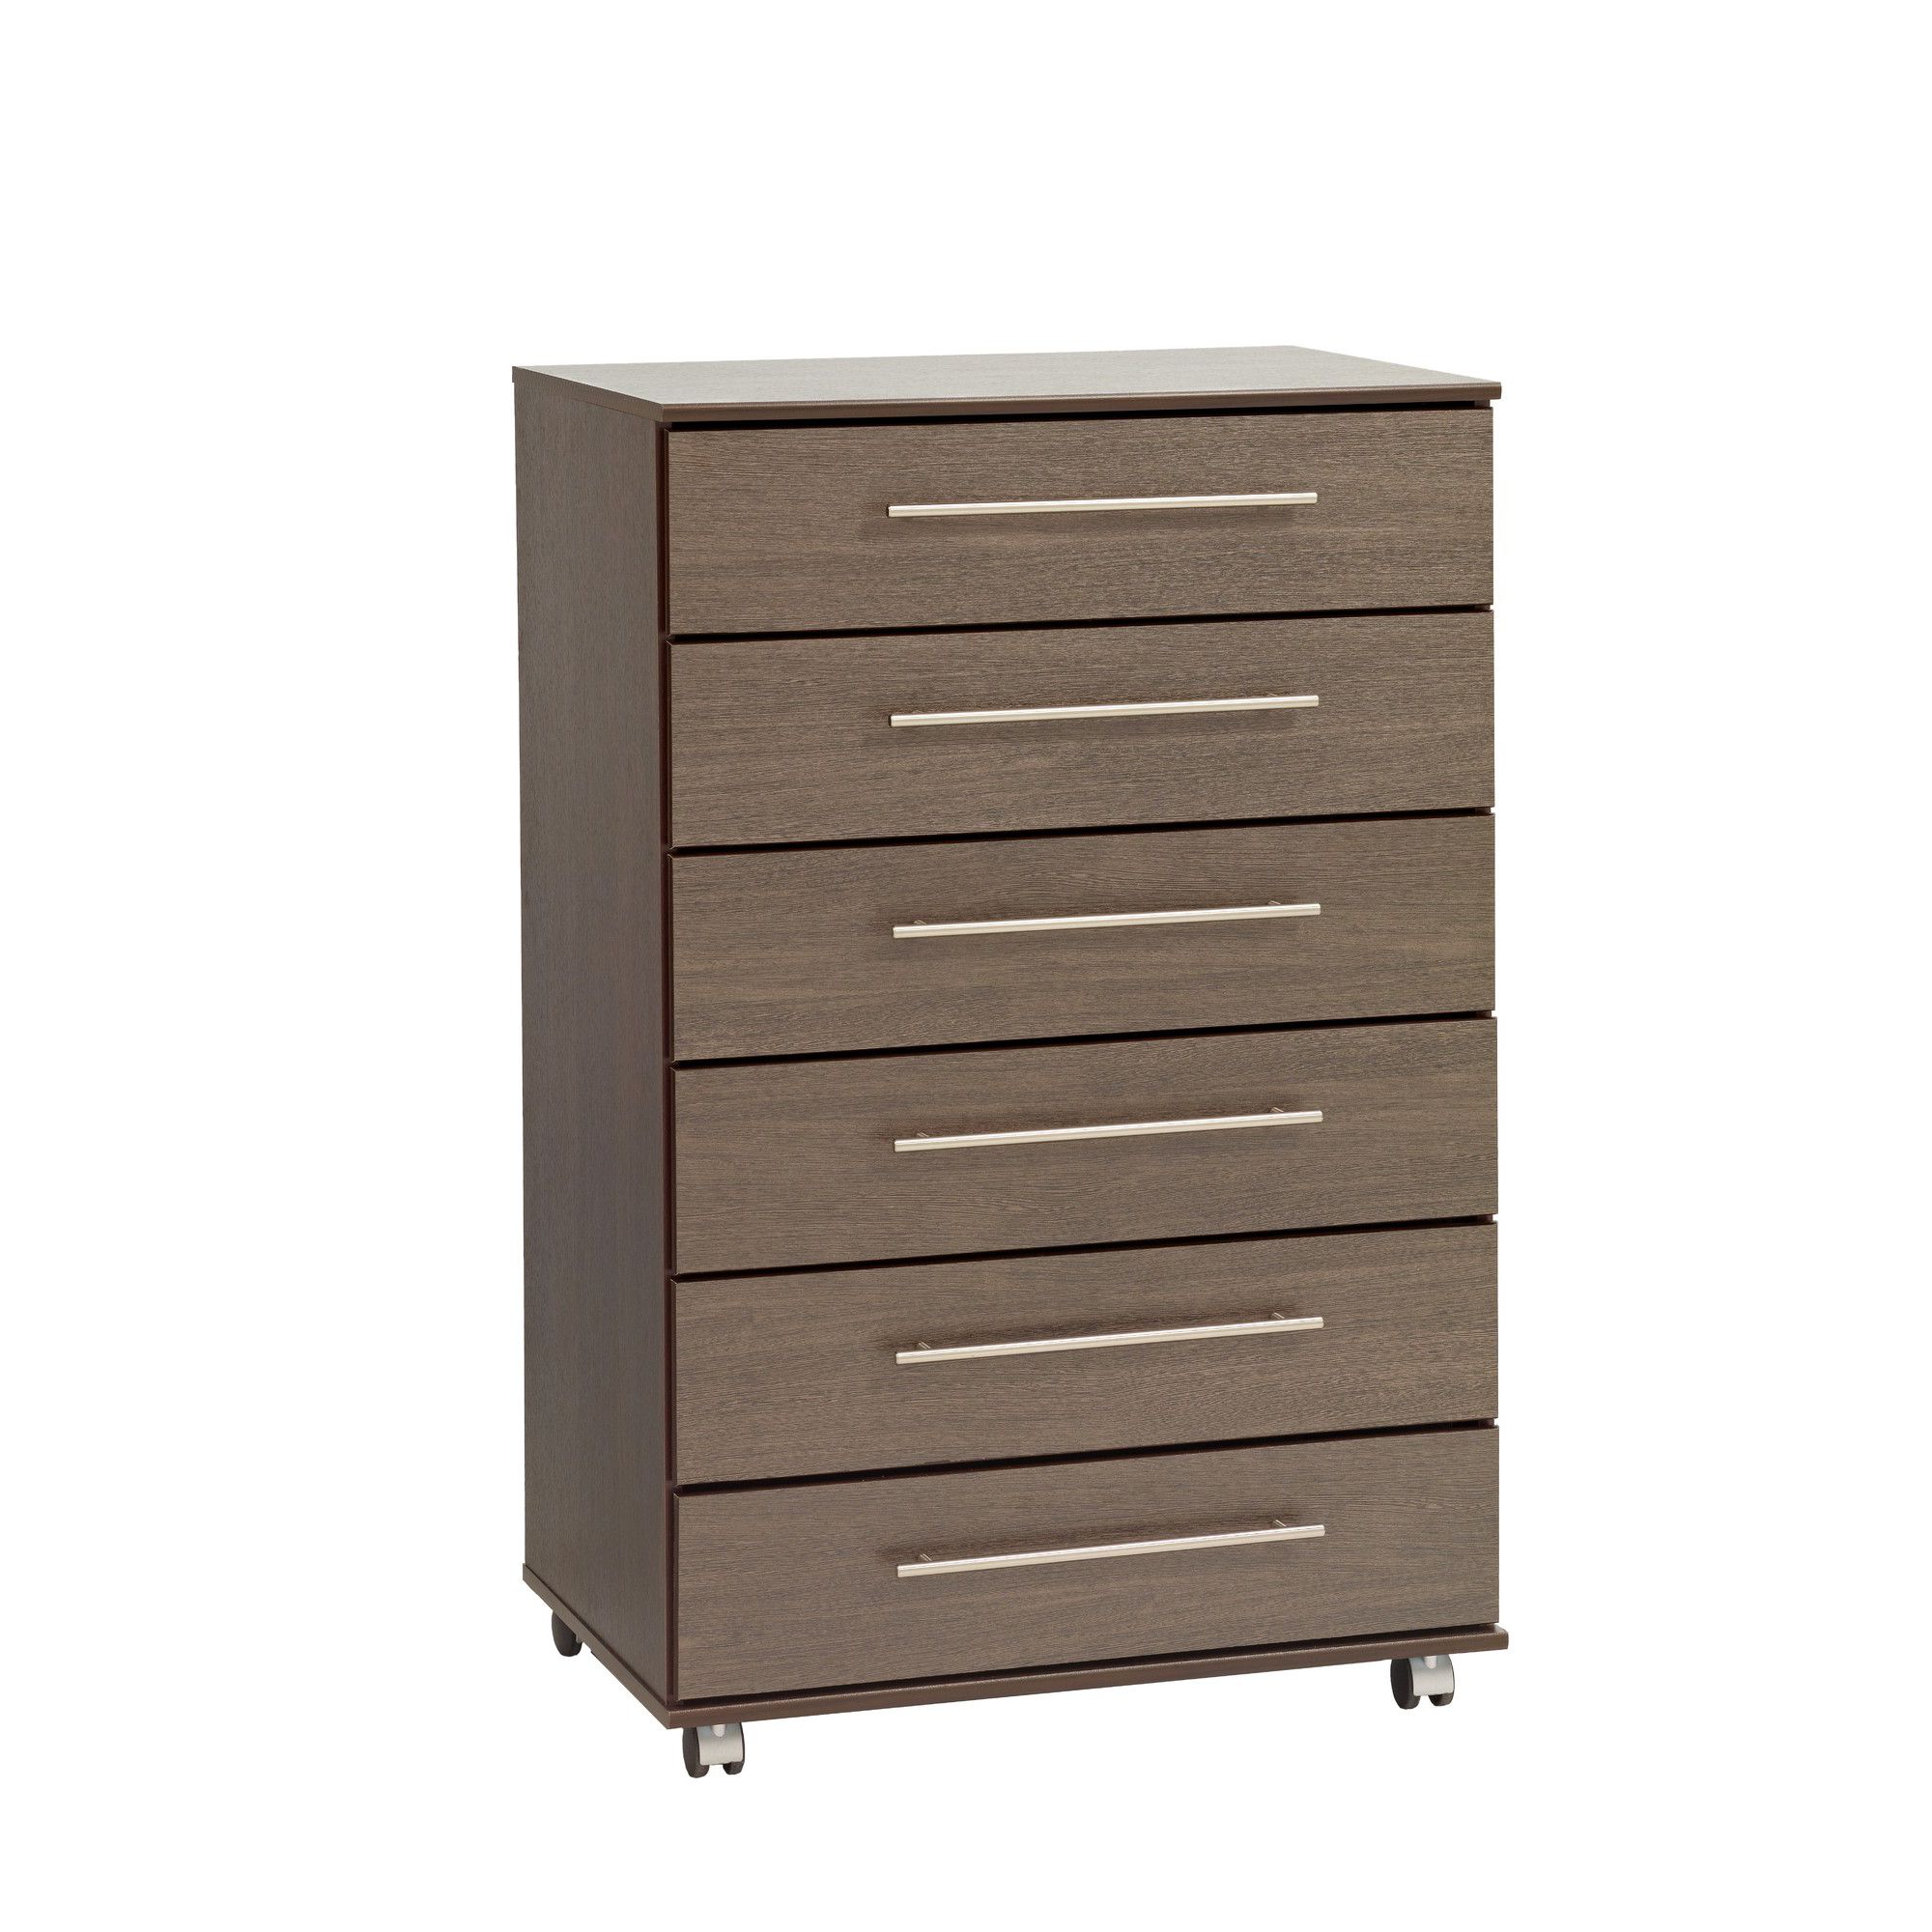 Ideal Furniture New York 6 Drawer chest - Wenge at Tesco Direct